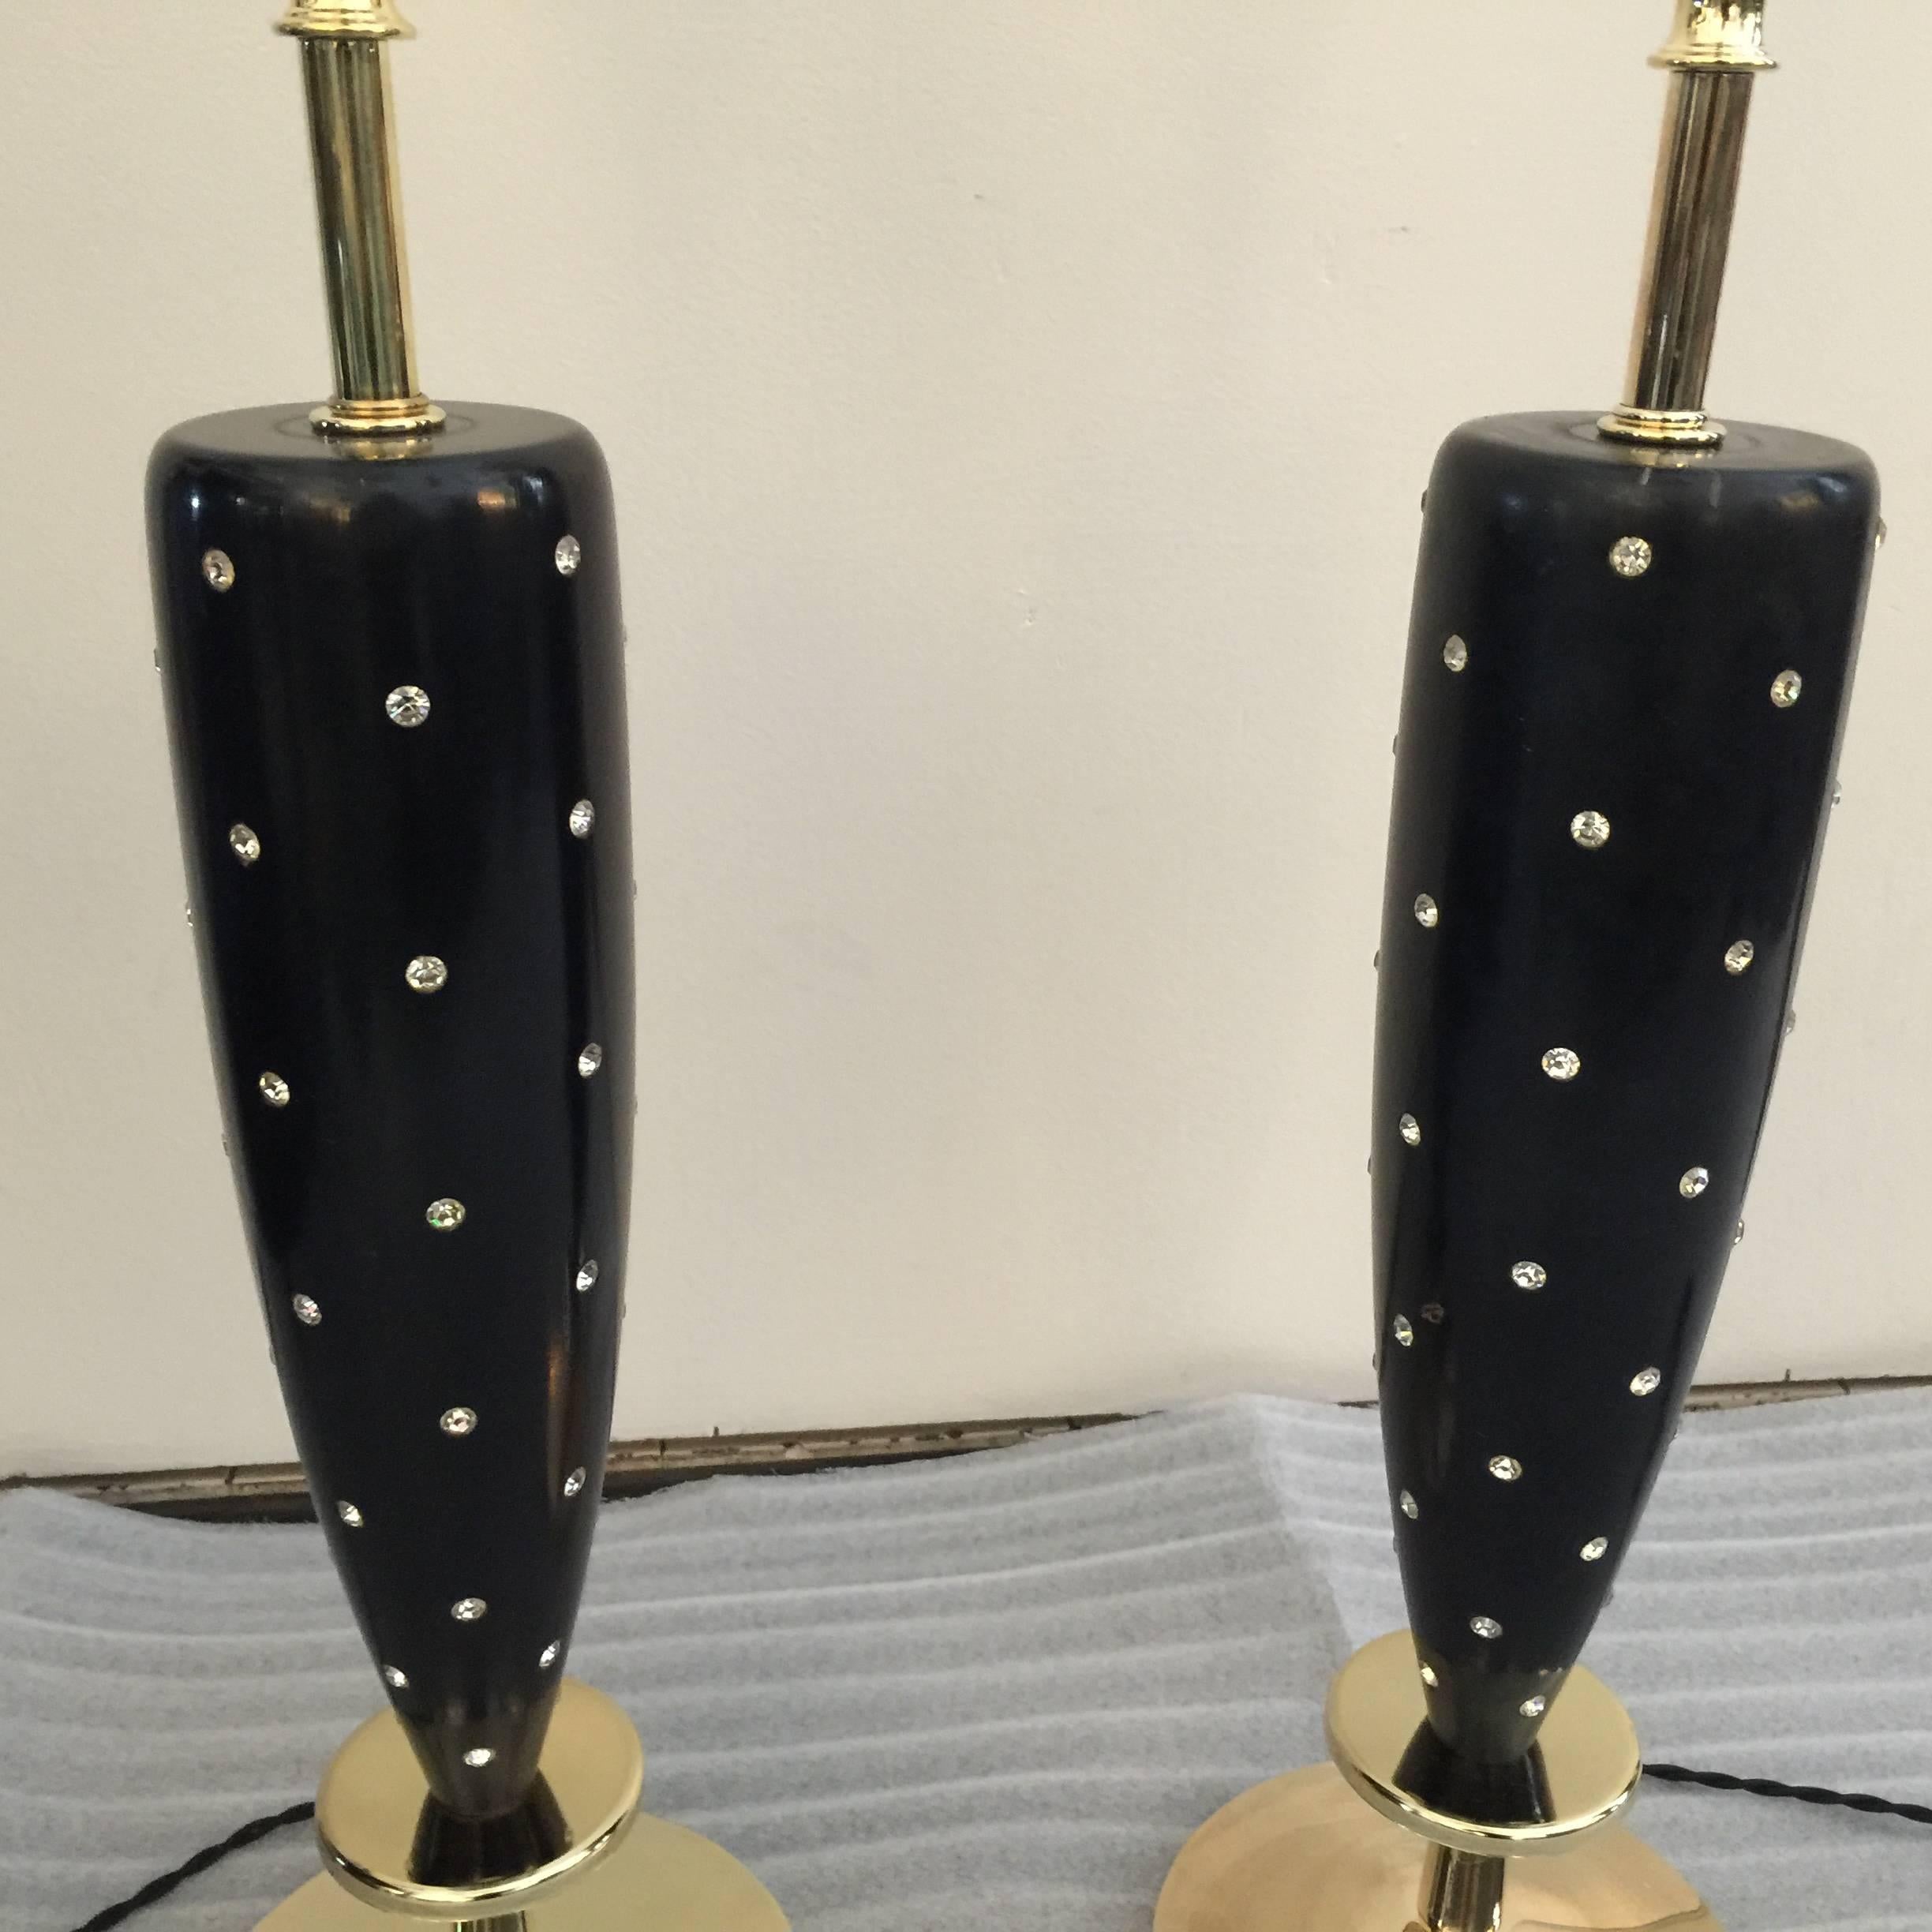 These wonderful Mid-Century table lamps by Rembrandt have been rewired and polished. The black lacquered wood is original with minor scuffs. A chic and glamorous design touch with embedded rhinestones. Milk glass diffusers are original as well in